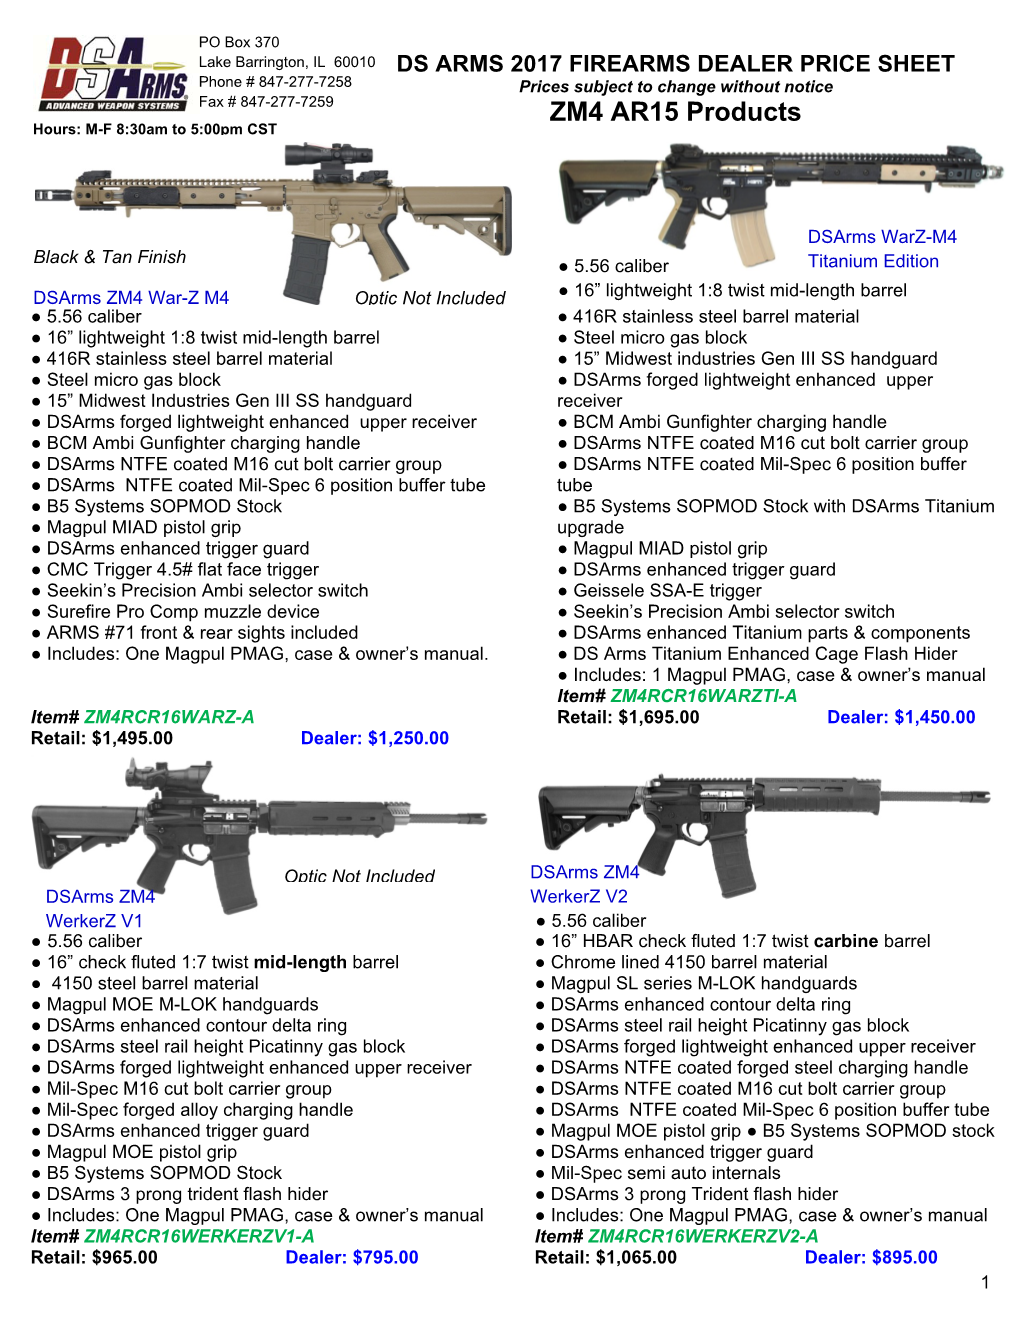 ZM4 AR15 Products Hours: M-F 8:30Am to 5:00Pm CST